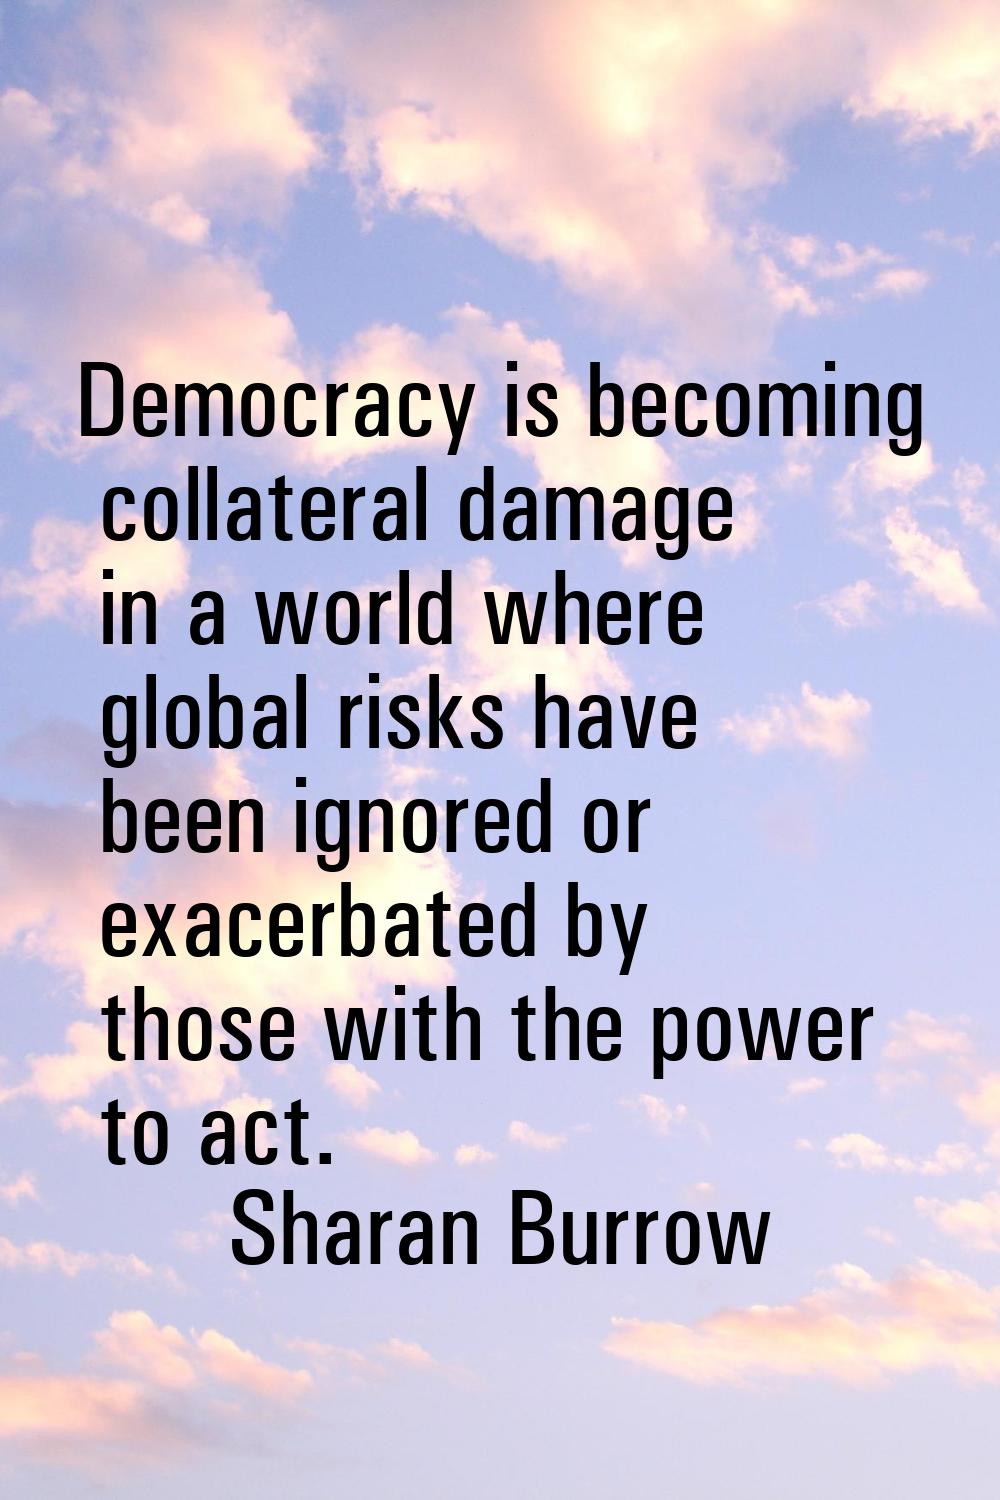 Democracy is becoming collateral damage in a world where global risks have been ignored or exacerba